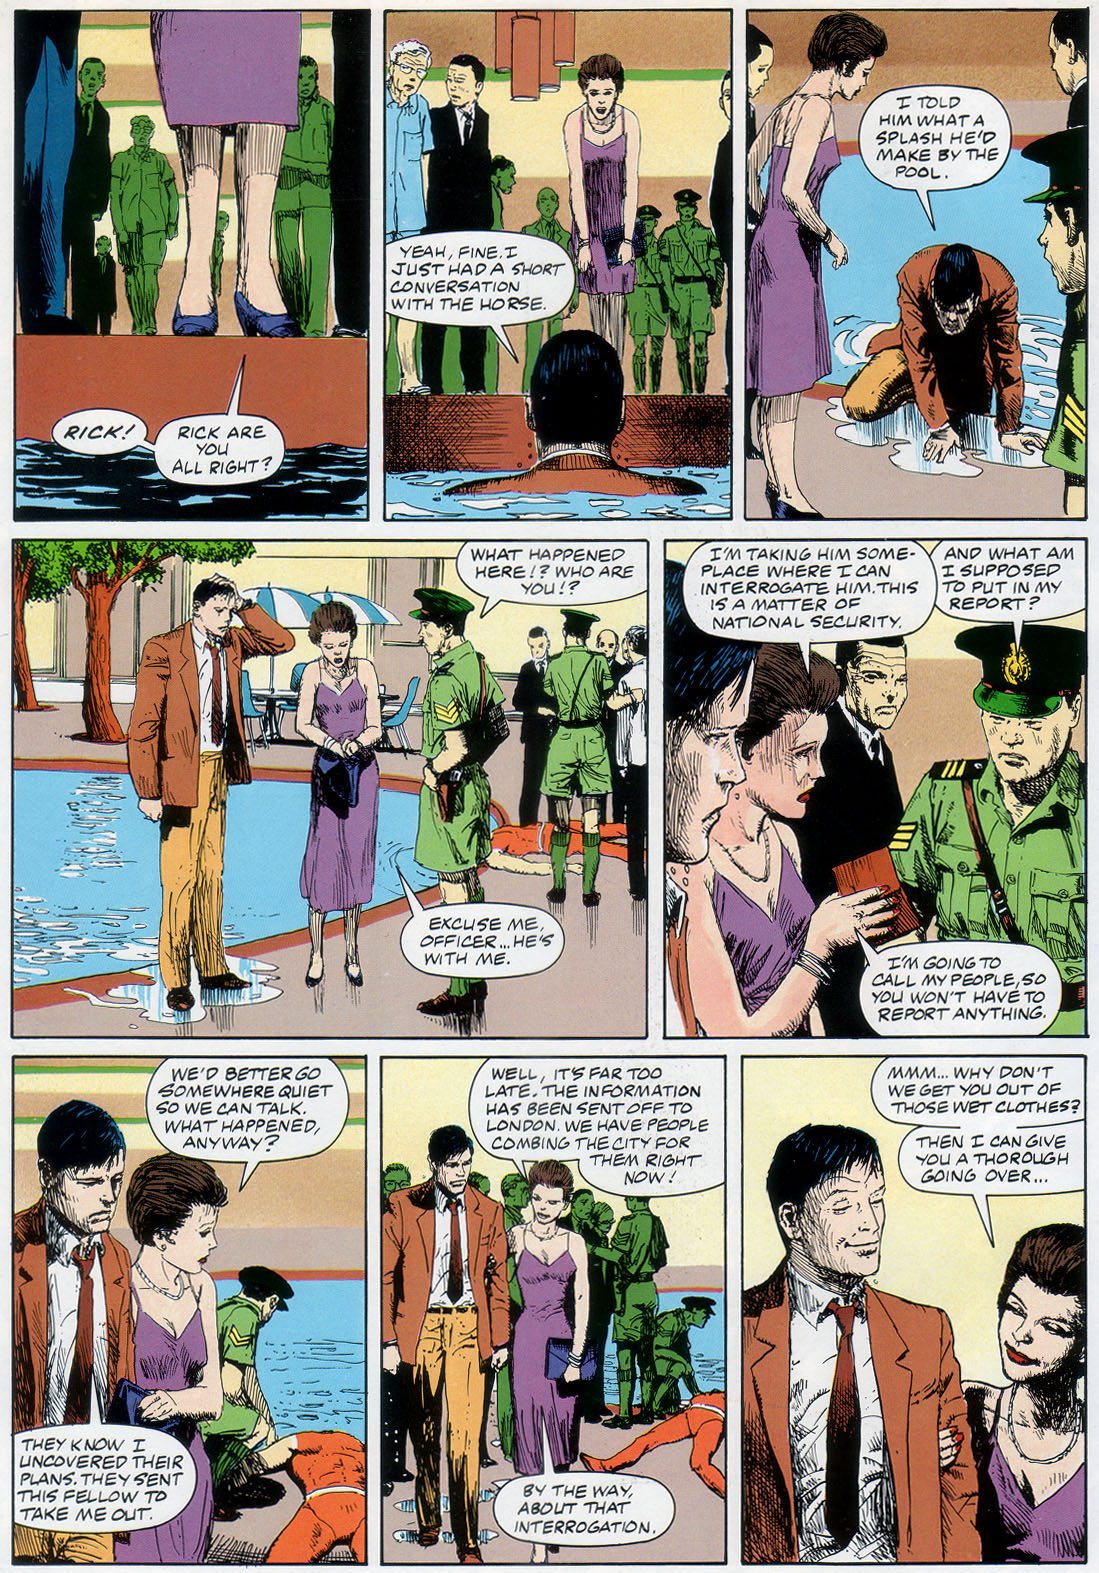 Marvel Graphic Novel issue 57 - Rick Mason - The Agent - Page 18